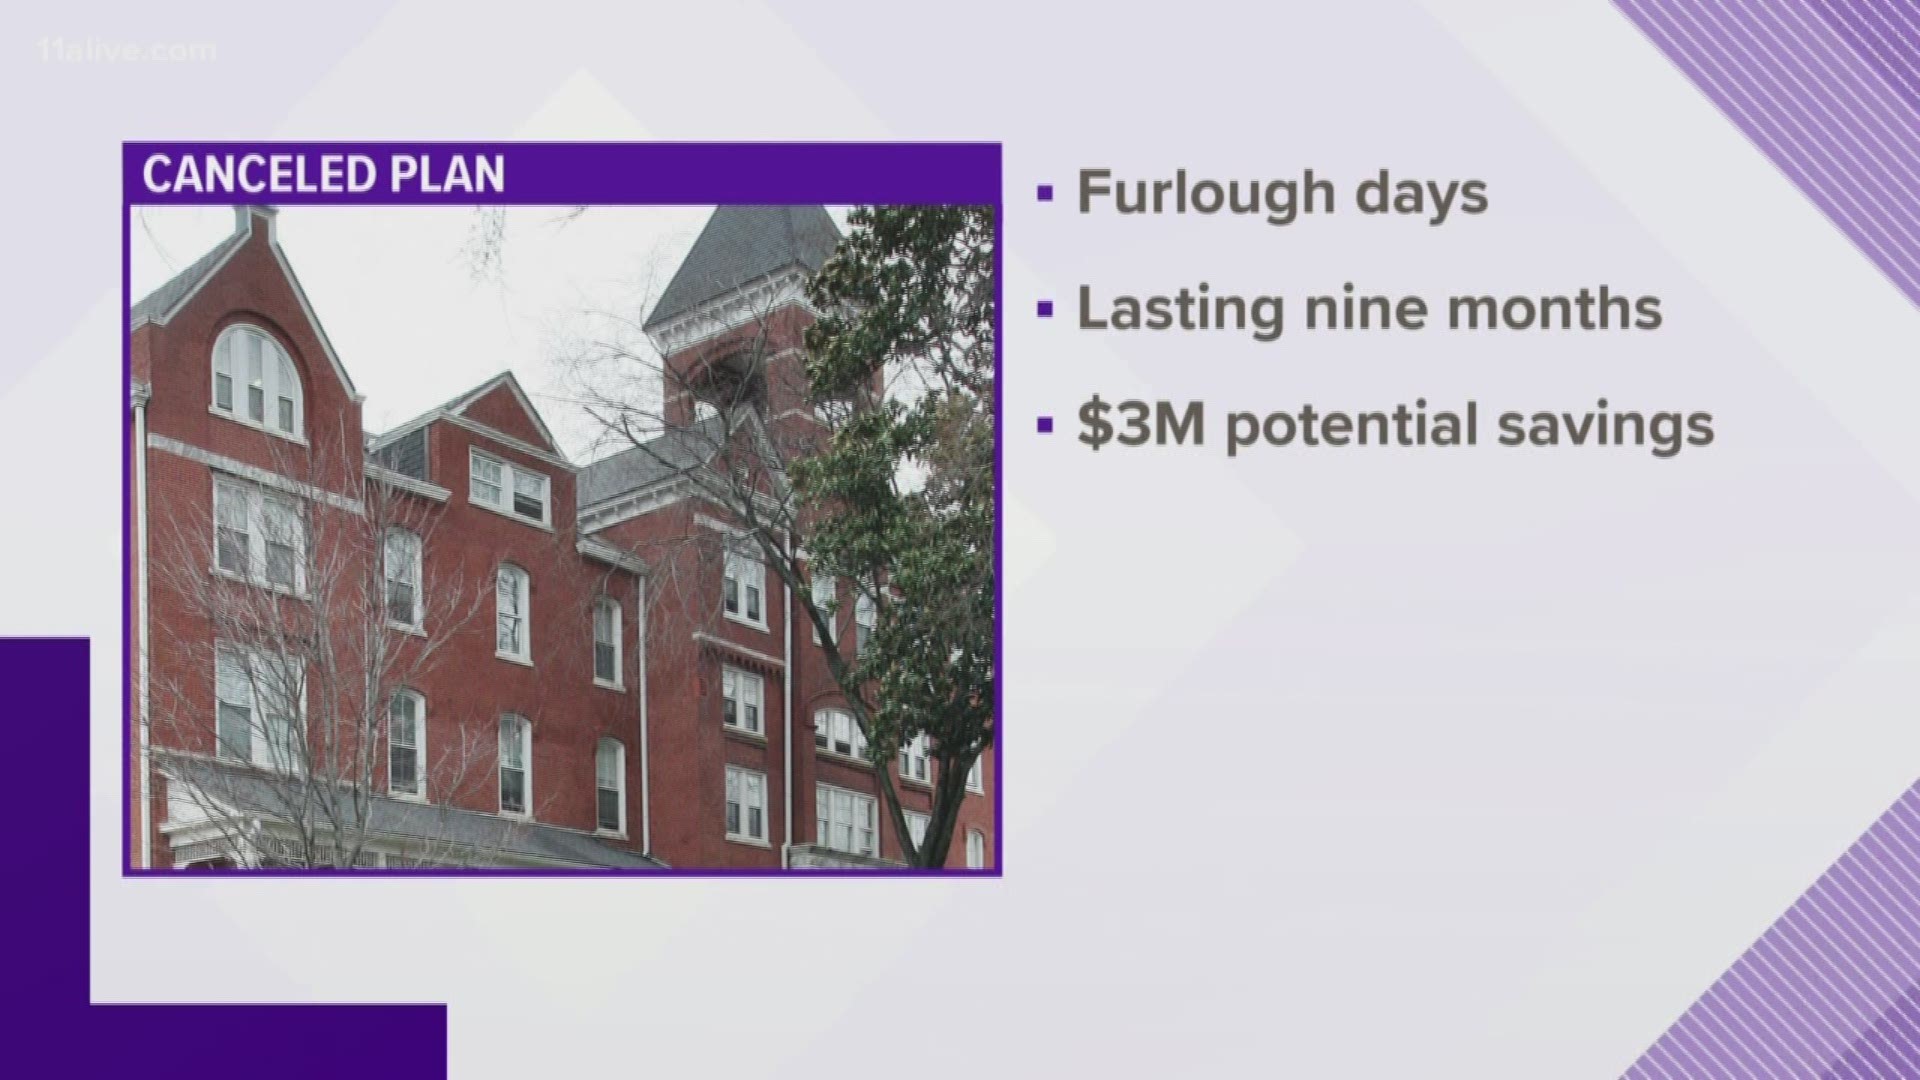 The college initially said that beginning Oct. 1, they'd implement furlough days for faculty and staff once a month for the next nine months as a cost-saving measure